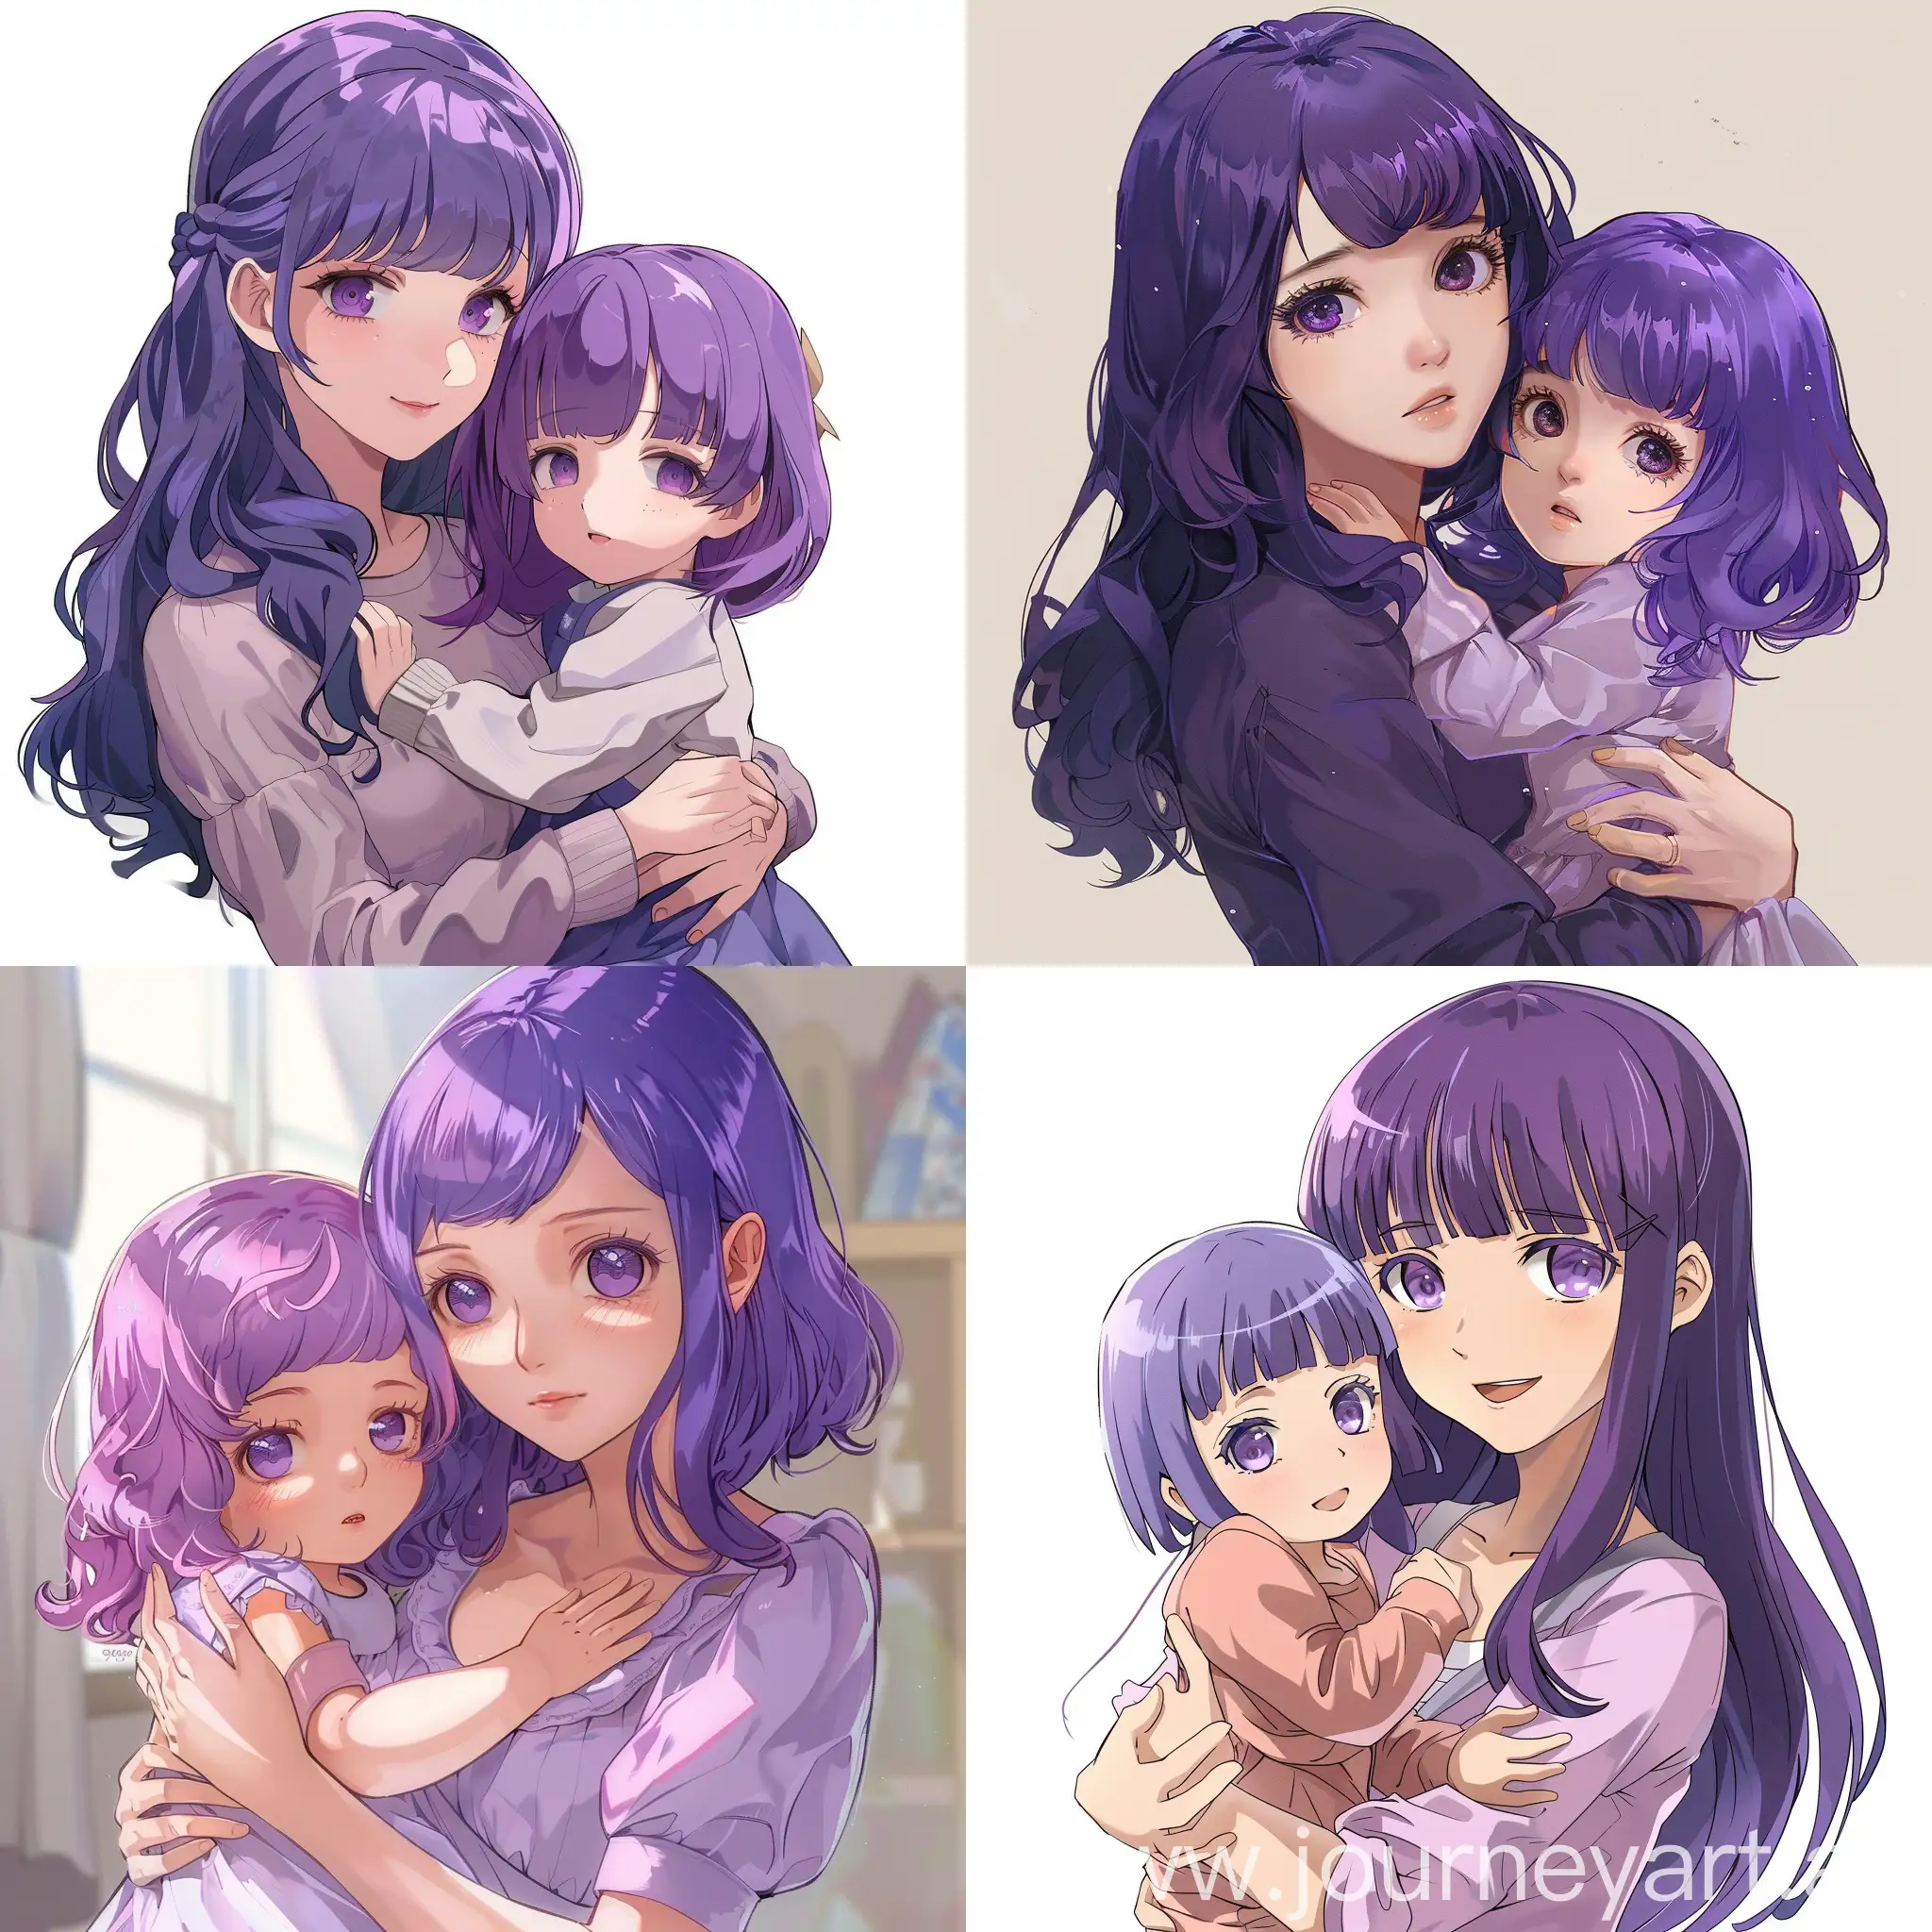 Cute anime mothing holding her one year old daughter, the daughter looks like her mom. Purple hair